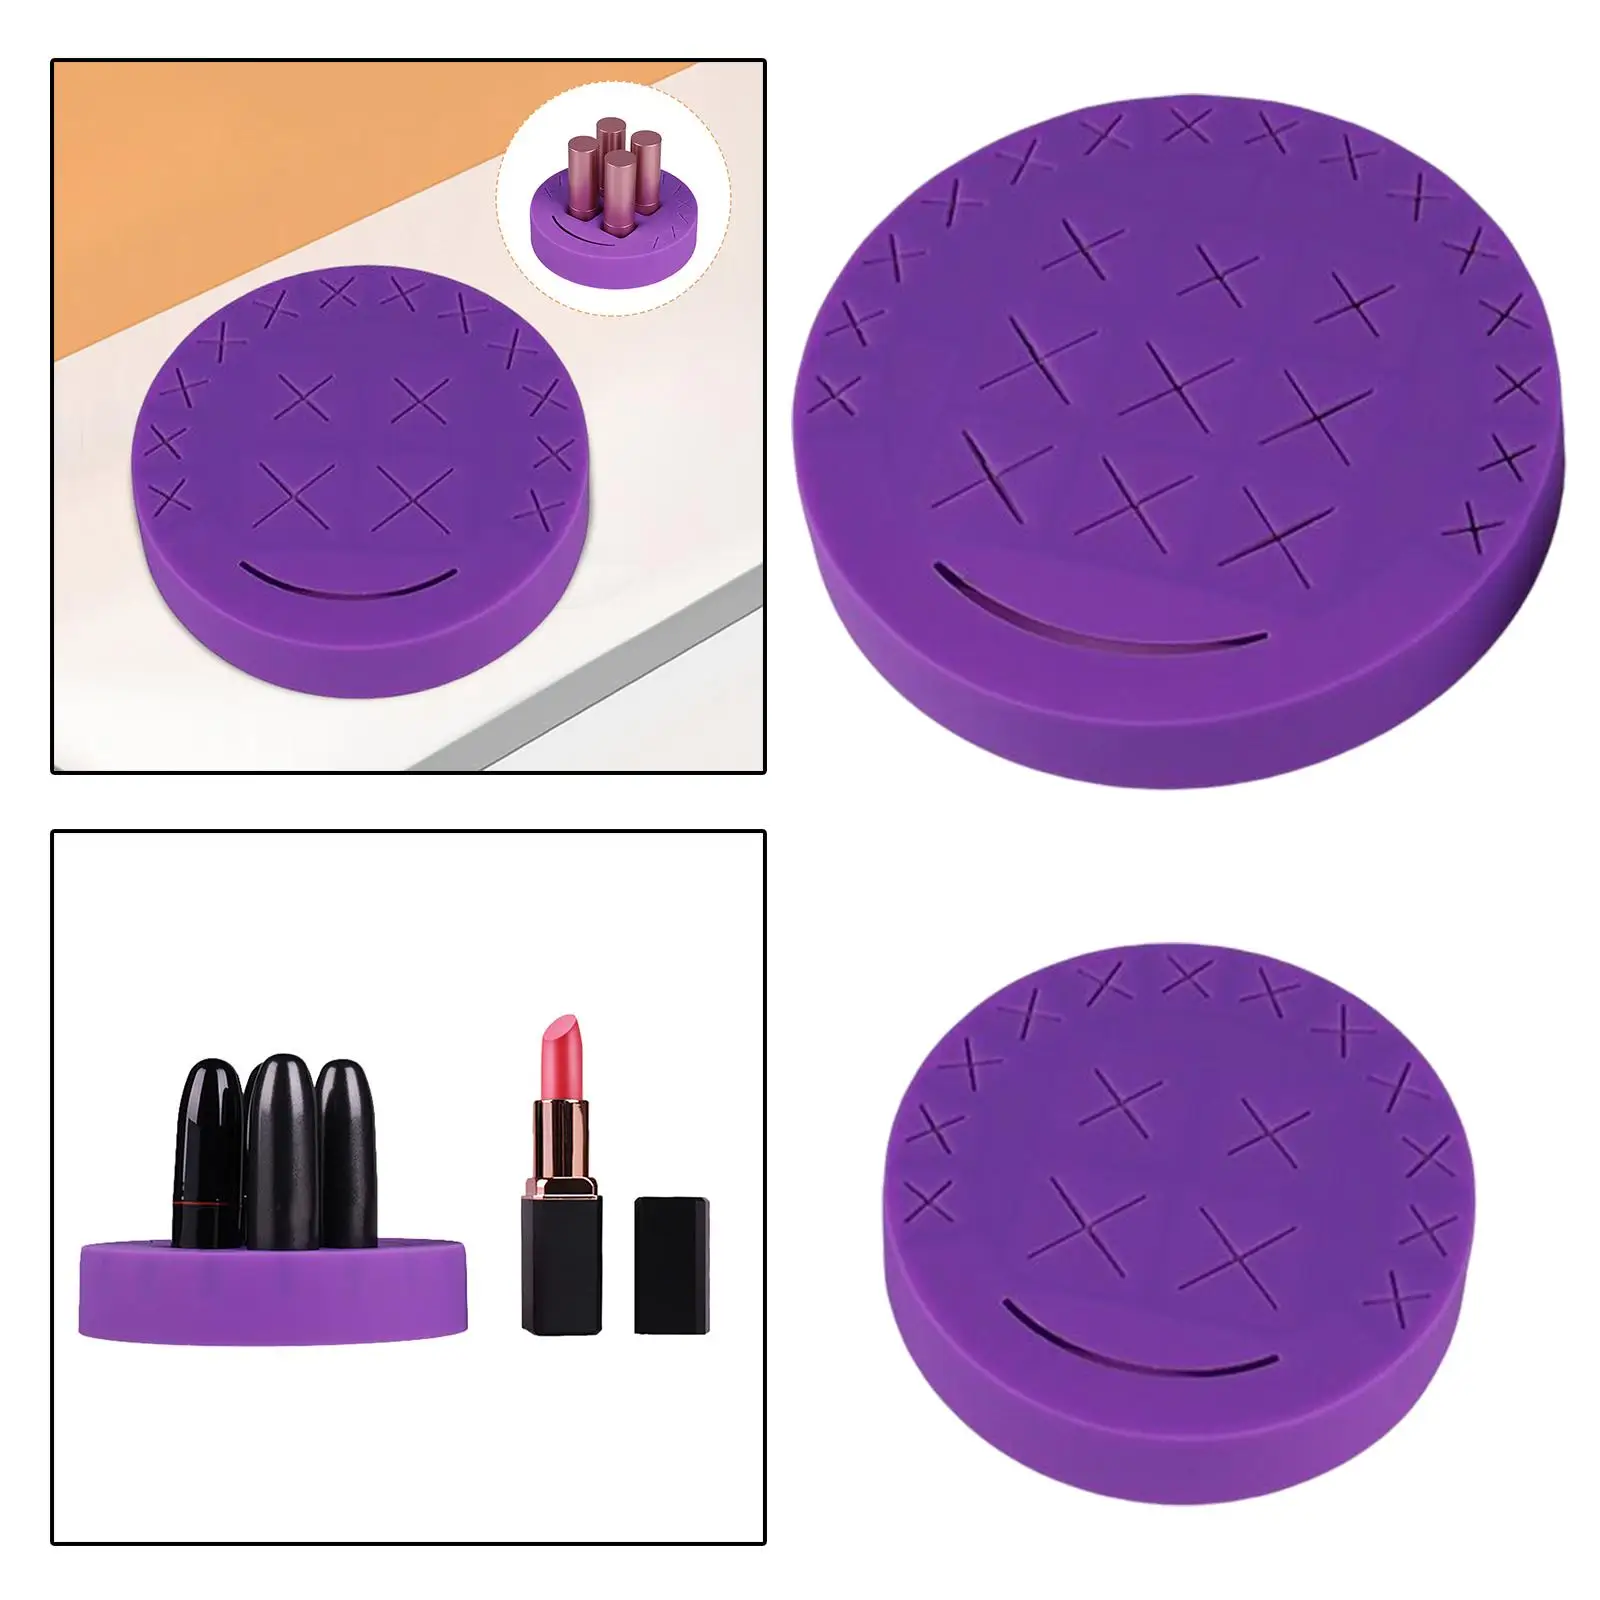 Makeup Organizer Silicone Lipstick Rack Easy to Use Counter Organizer for Bathroom Bedroom